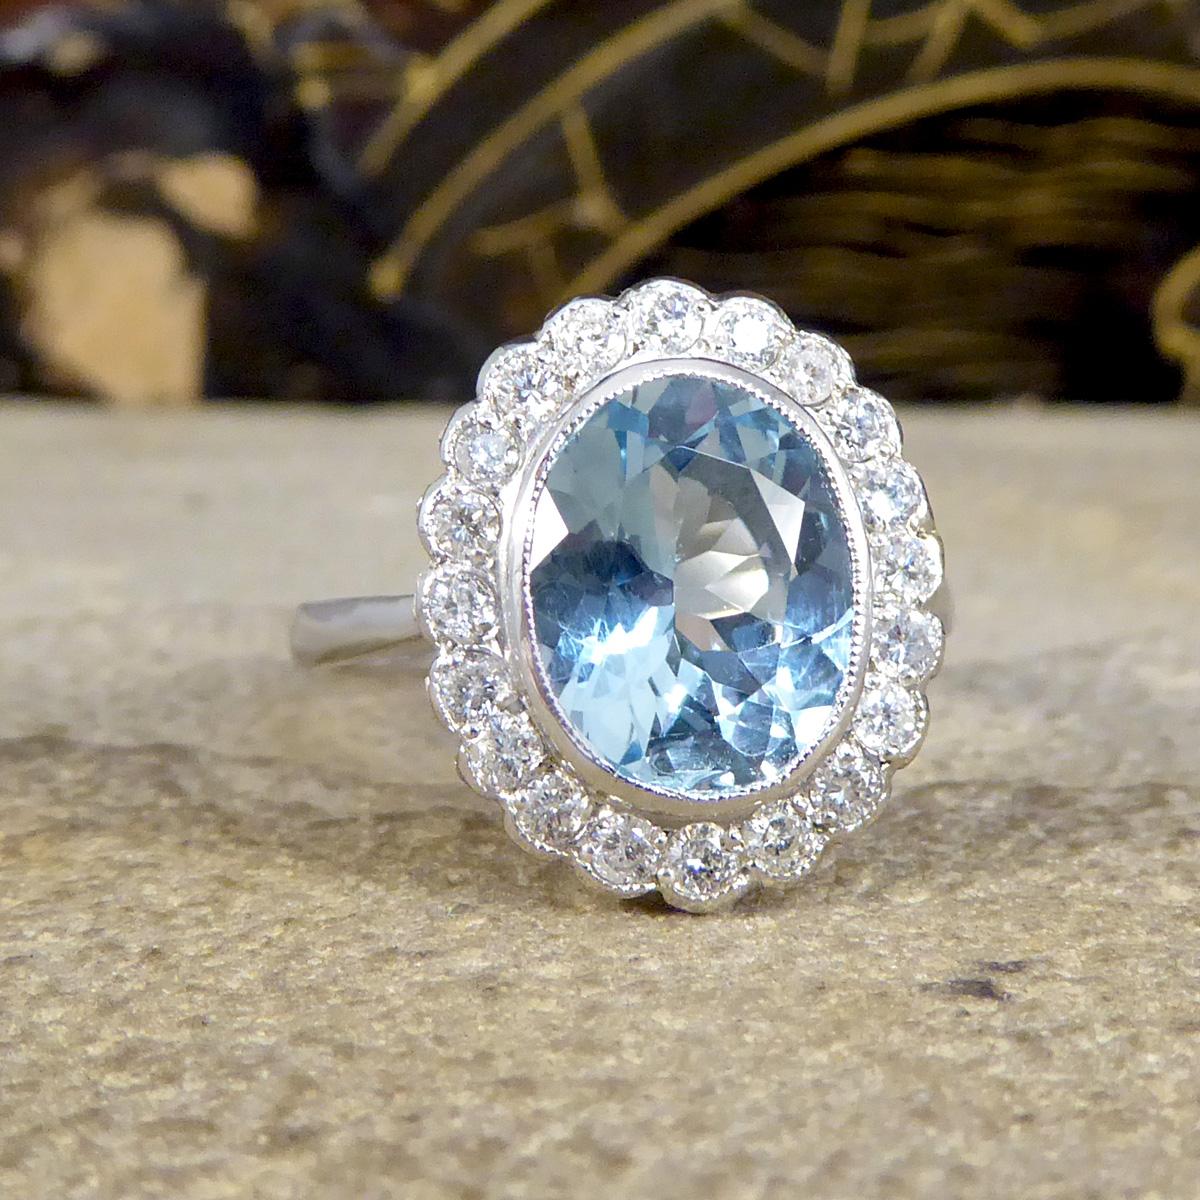 This contemporary has been designed to resemble an Edwardian piece with its milgrain detailing and basket setting. This ring holds a beautifully blue oval cut Aquamarine in the centre in a bezel setting weighing 2.25ct with a surround of 20 Modern